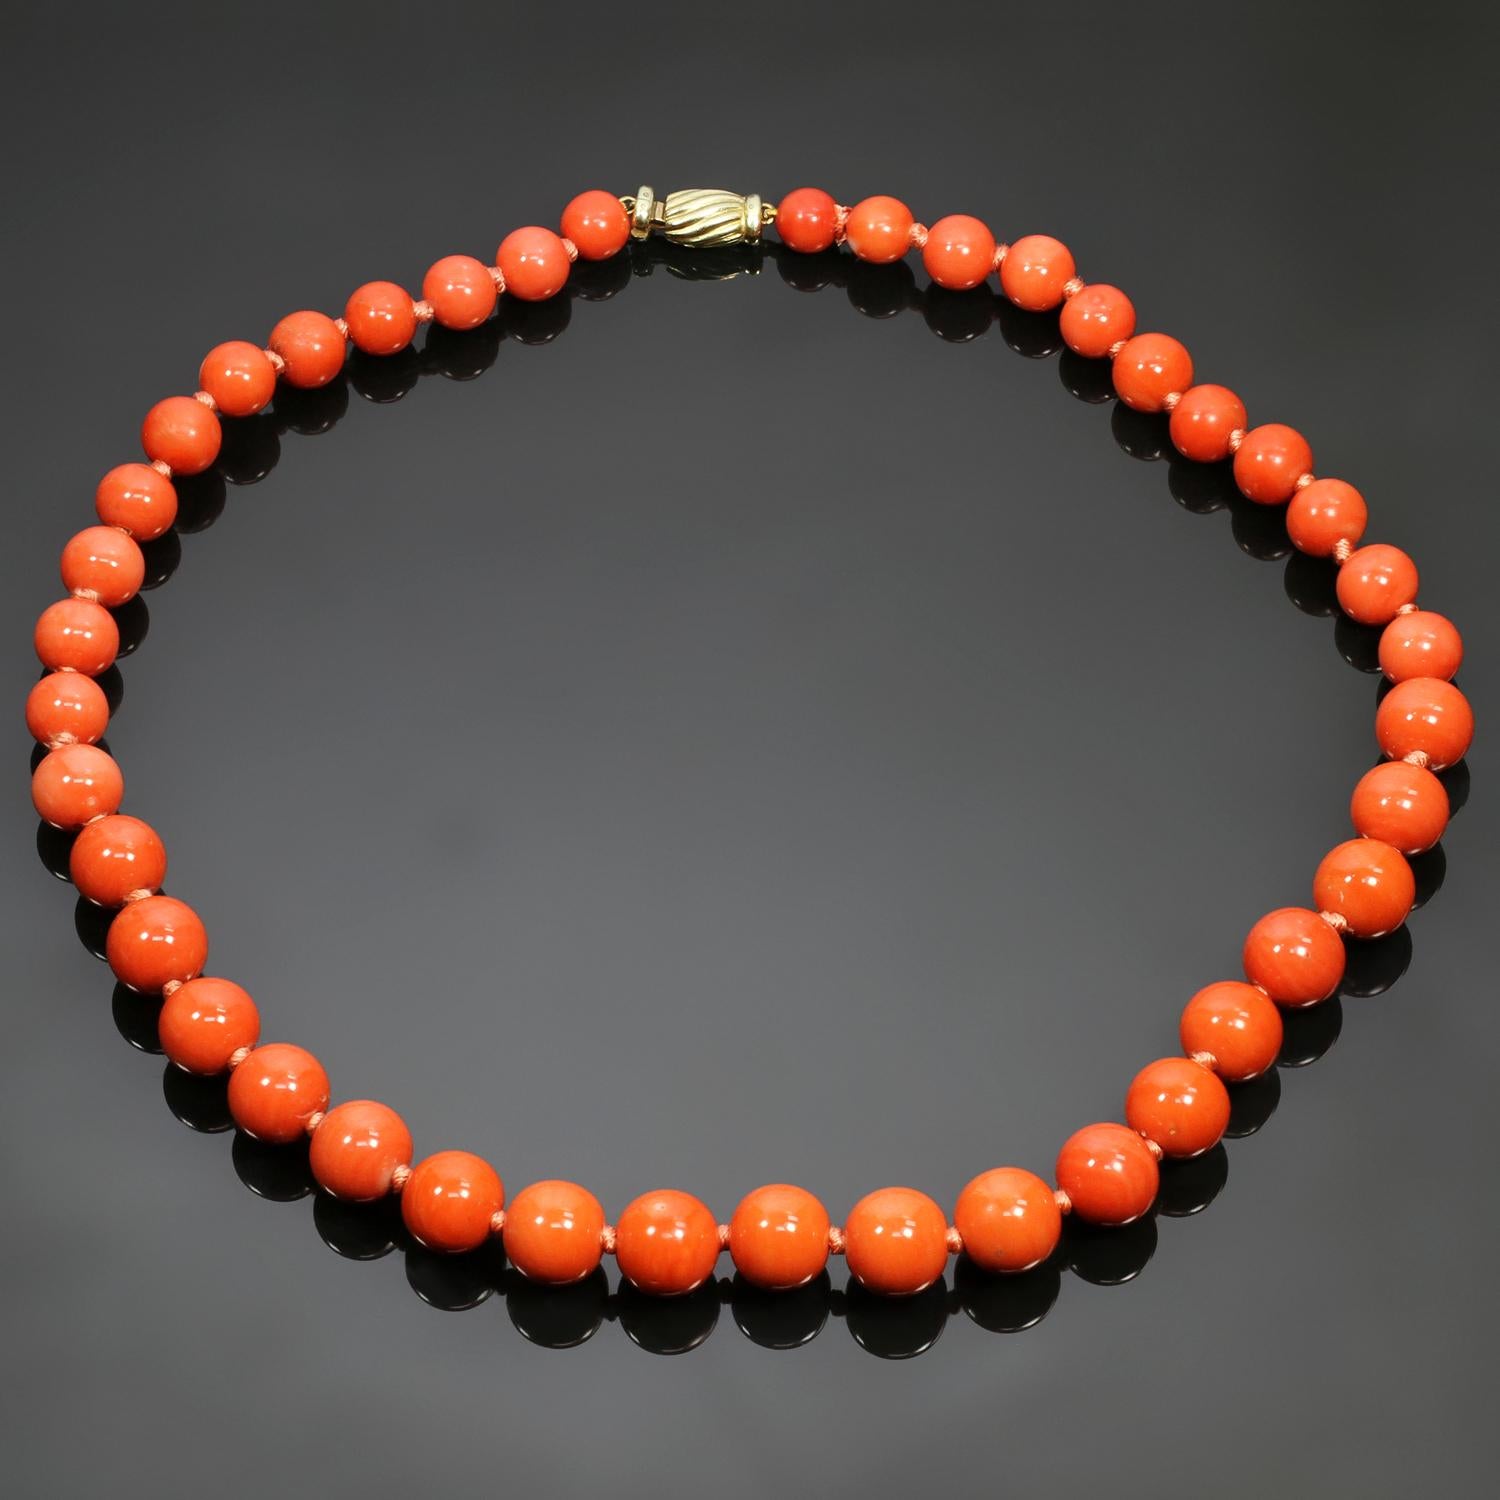 This rare vintage necklace is composed of genuine coral beads forming a graduated strand and ranging in size from 7.50mm to 12.00mm. Completed with a 14k yellow gold clasp accented by a single-cut diamond. Made in Italy circa 1980s. Measurements: